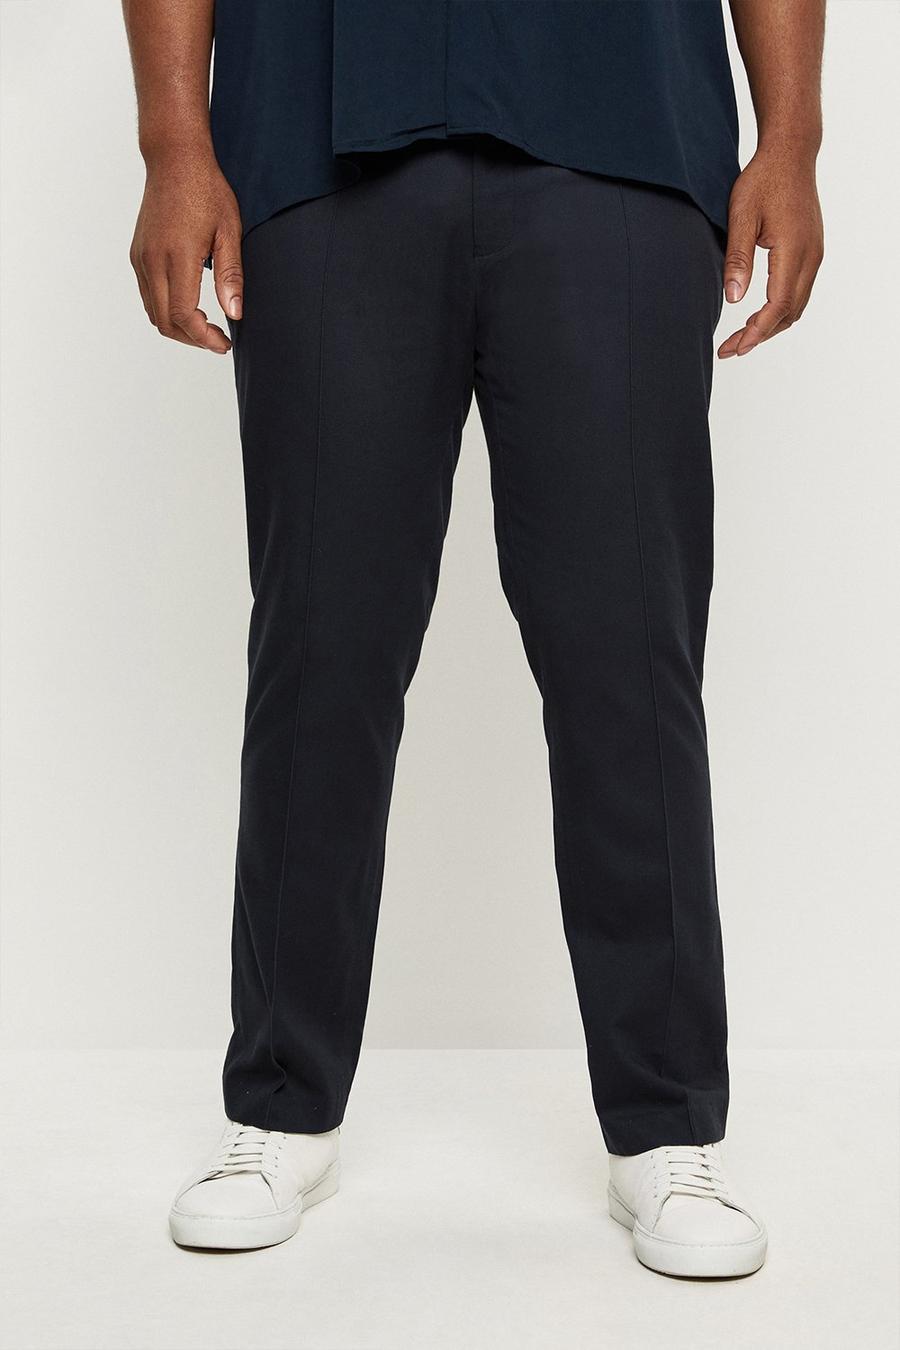 Plus And Tall Navy Pintuck Skinny Fit Trouser